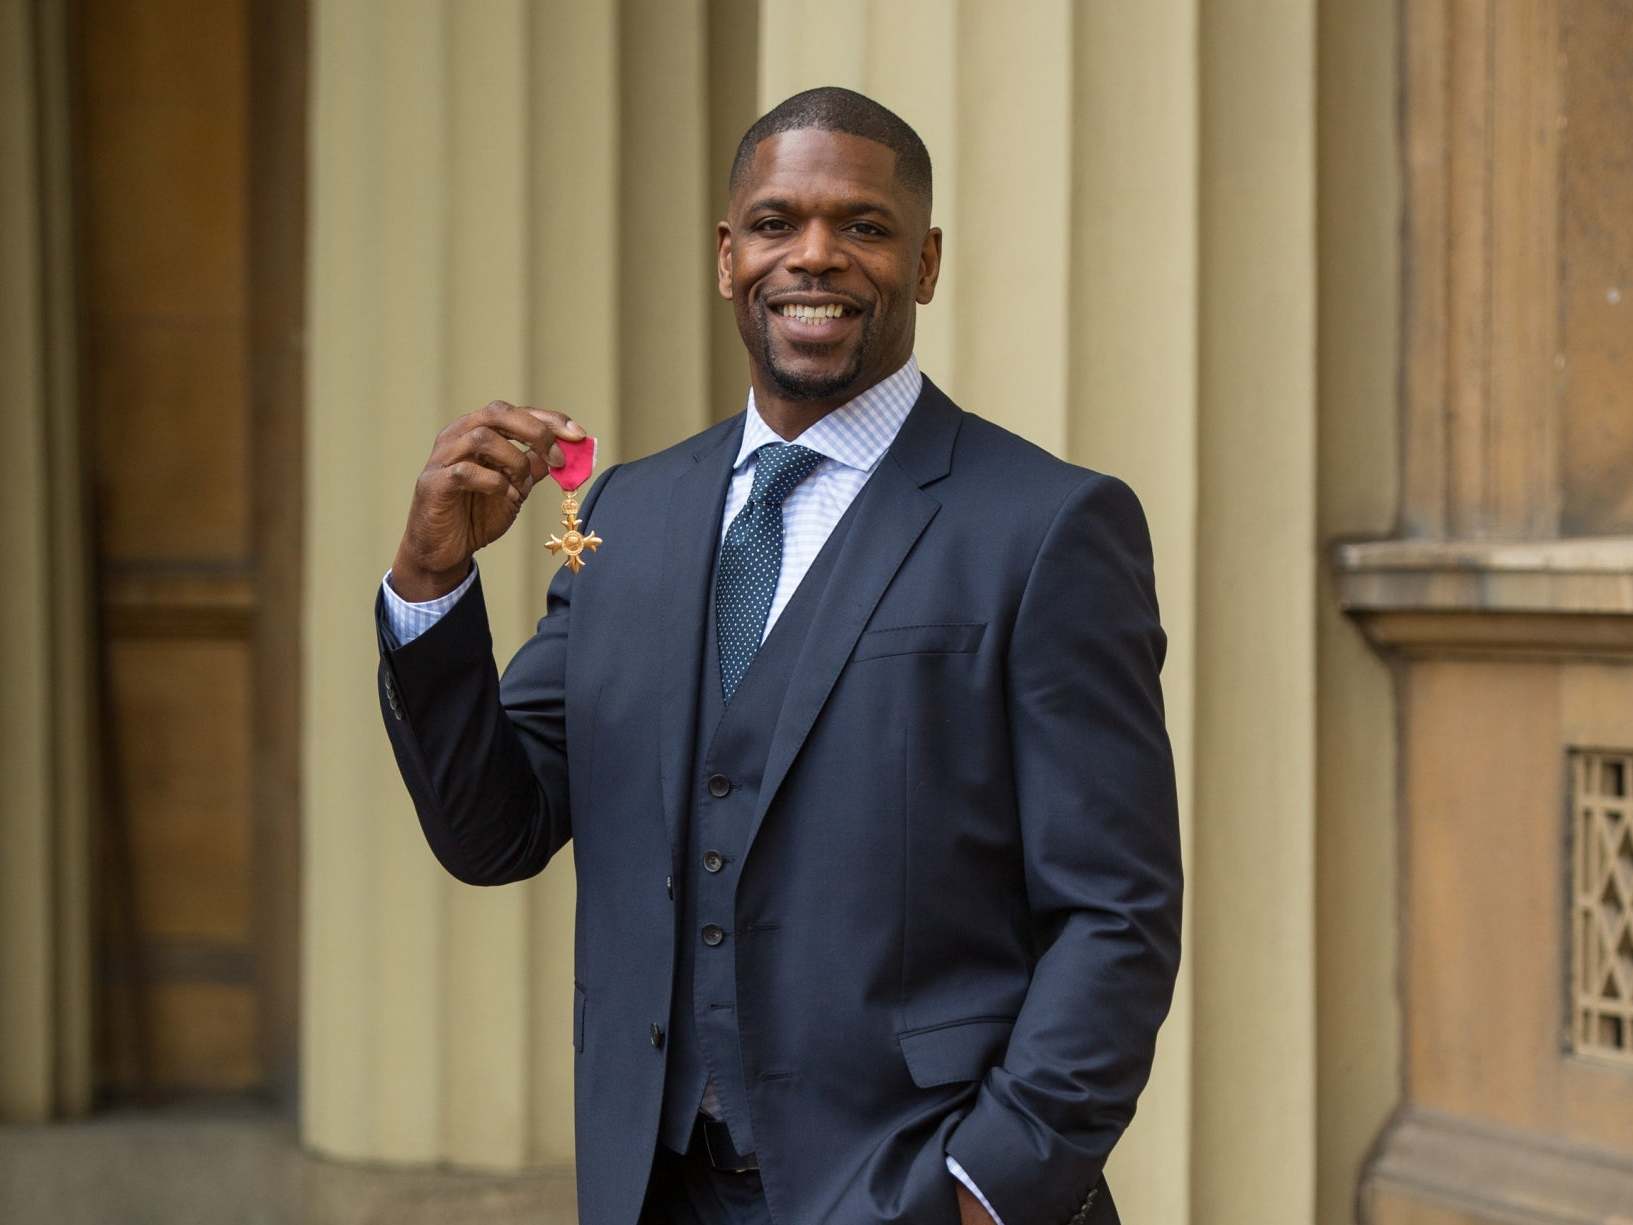 Prince poses after being appointed OBE for services to tackling knife and gang crime